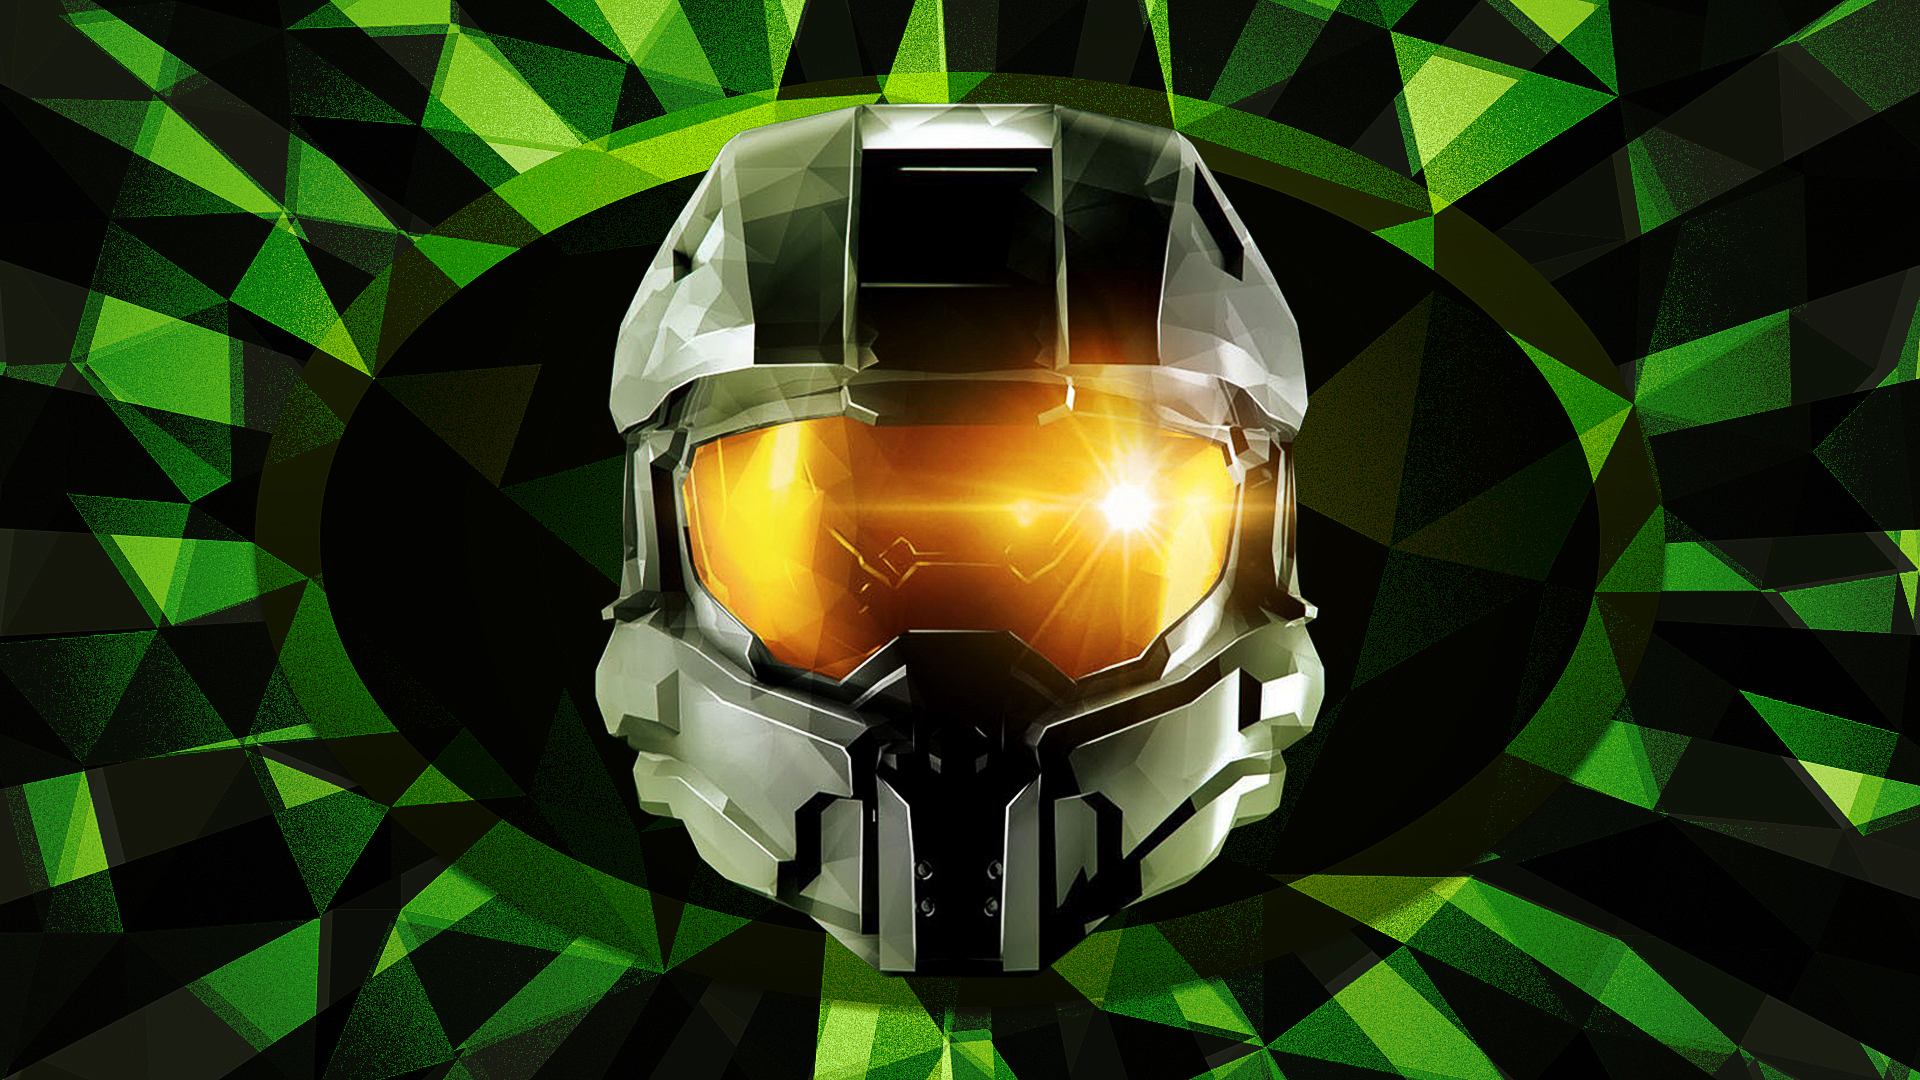 Master Chief from Halo on a graphic pixelated green background